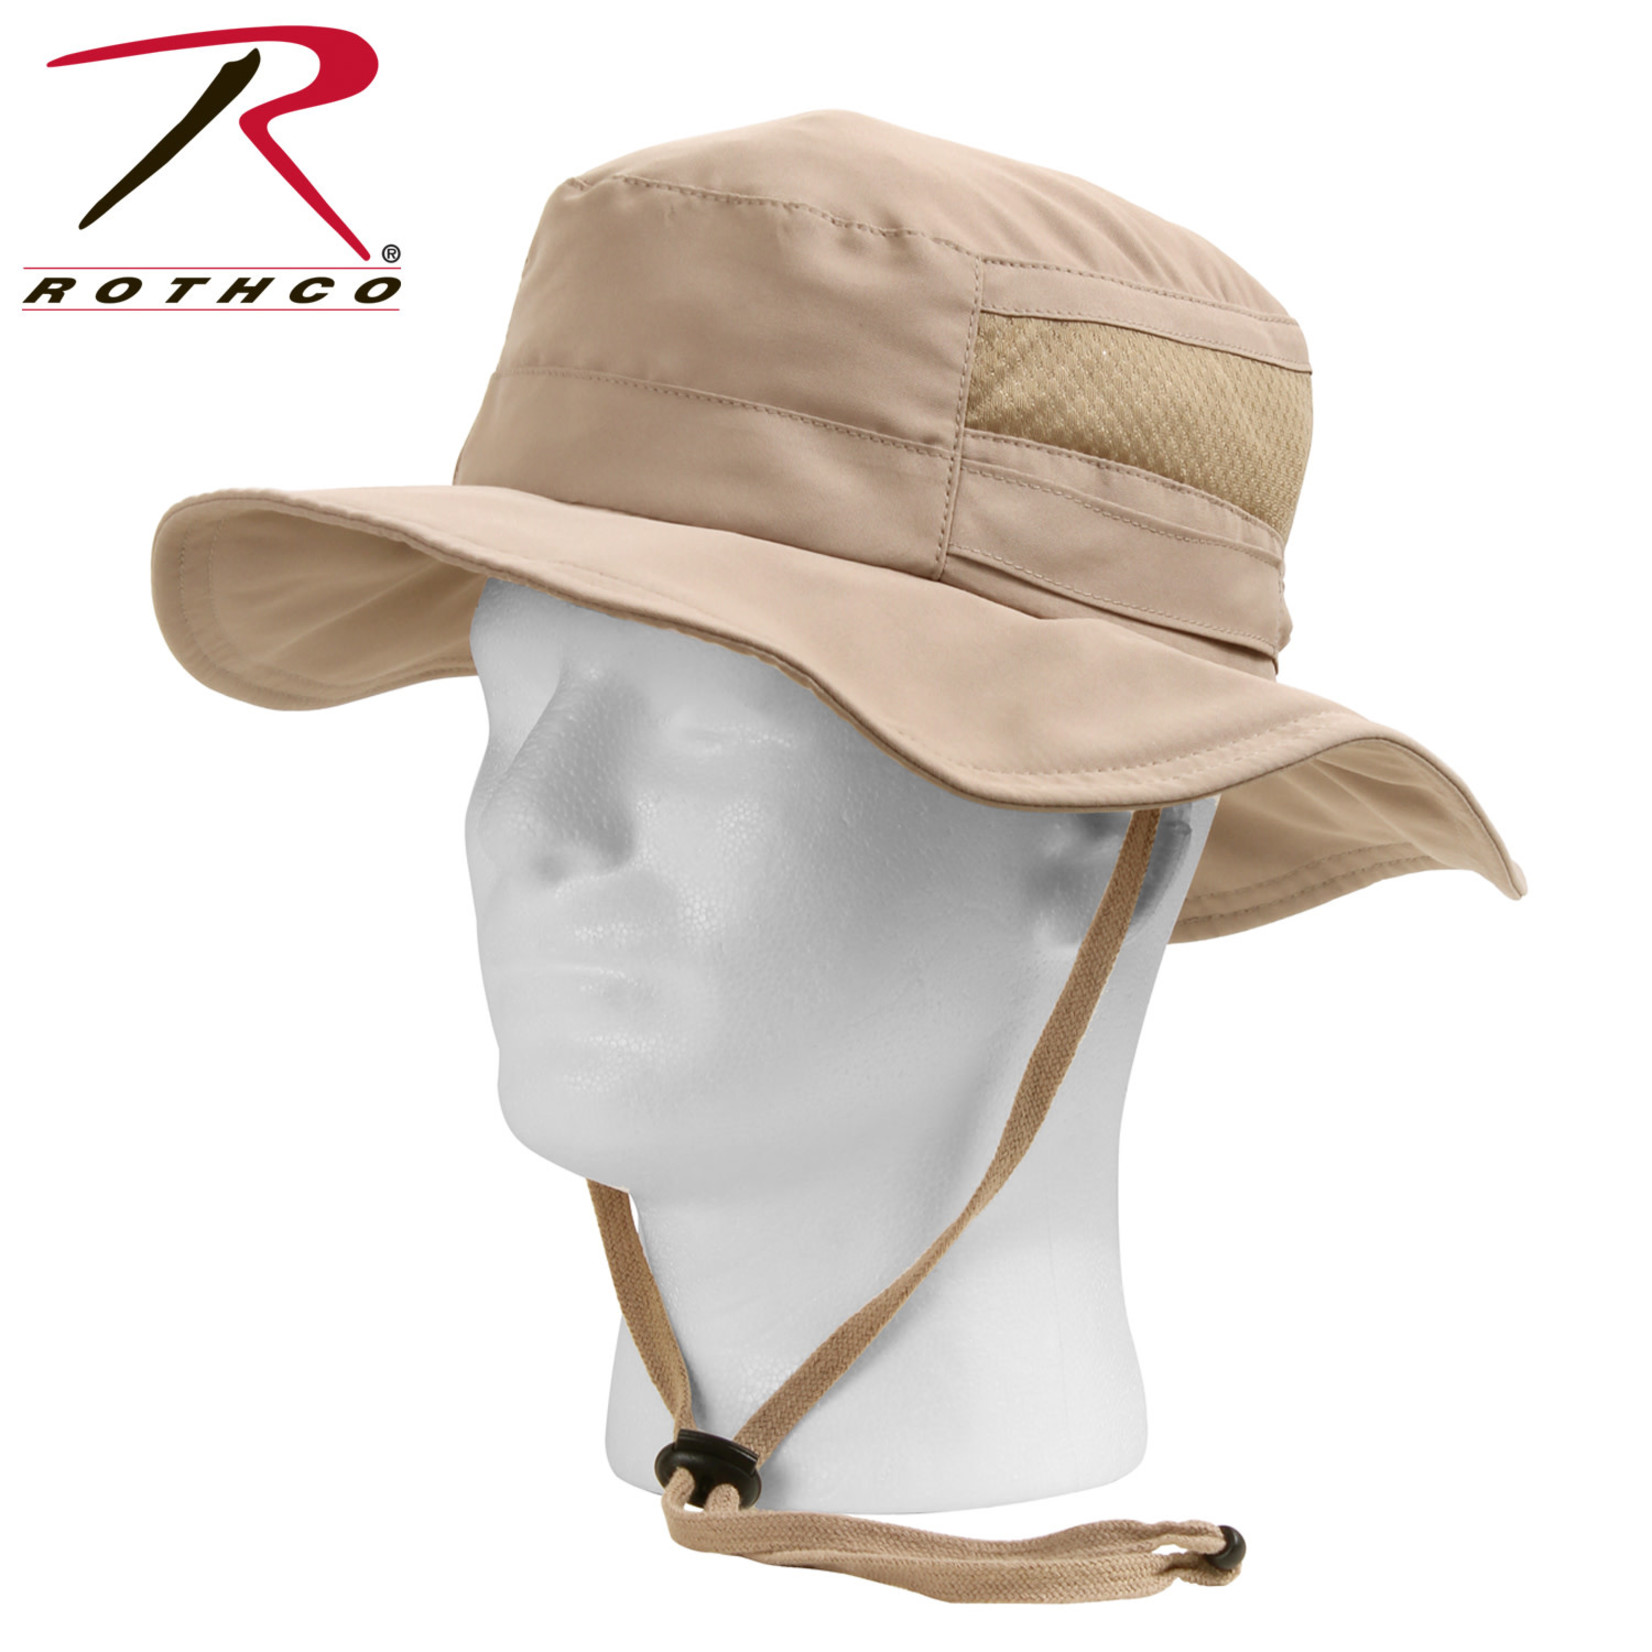 Rothco Rothco Lightweight Adjustable Vented Boonie Hat